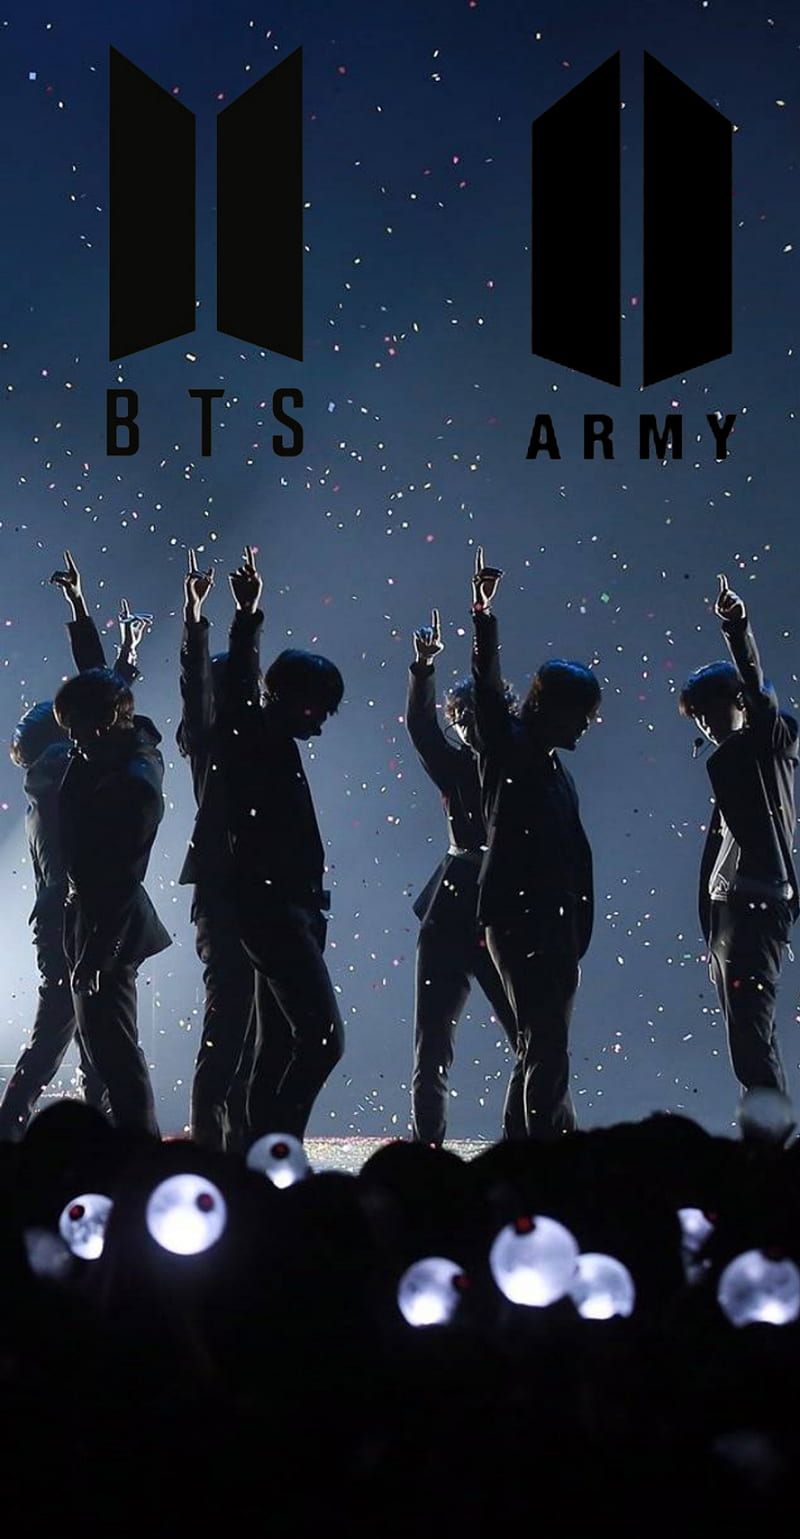 The fandom of BTS " ARMY" ranked as the best fandom in Sri Lanka by